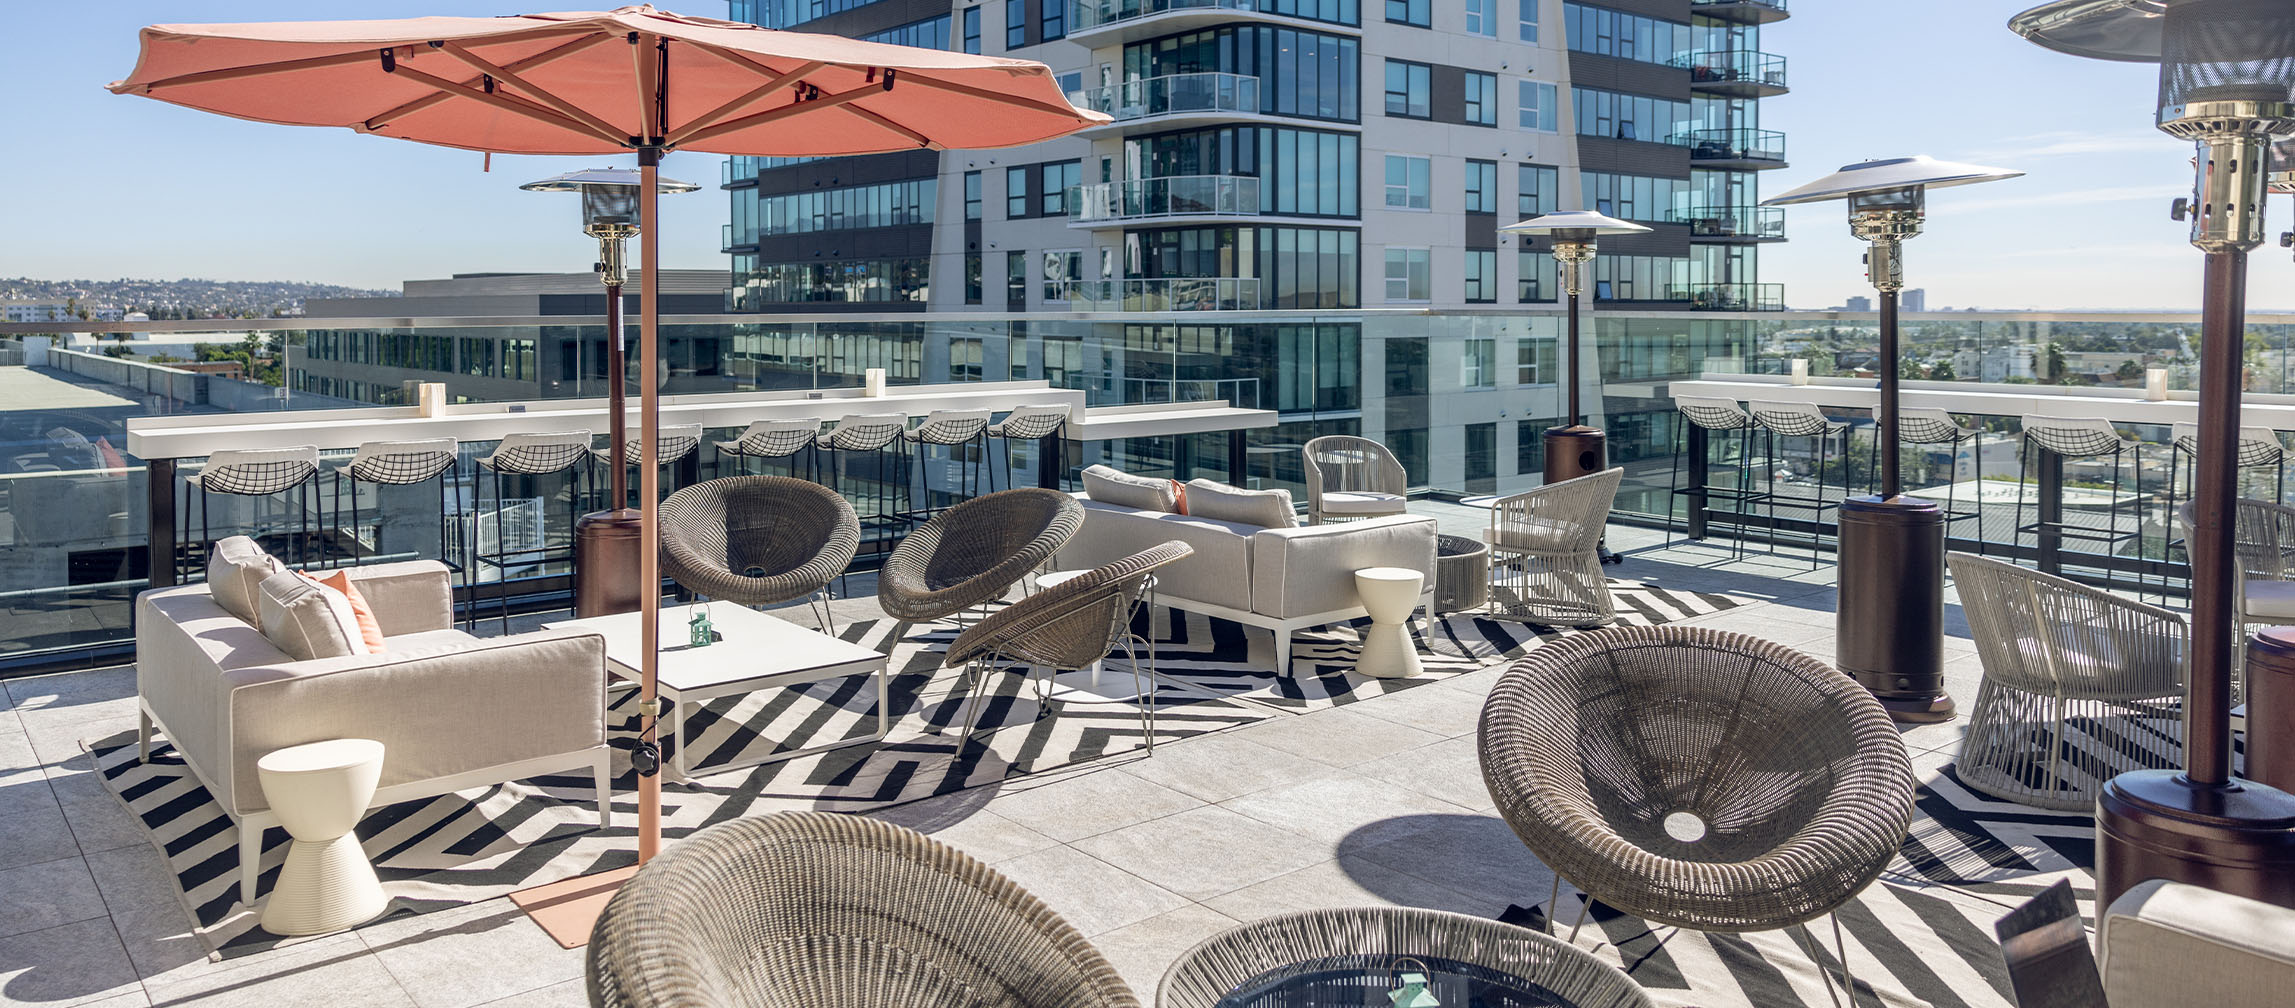 Best Hotel with Rooftop Pool & Lounge in Los Angeles